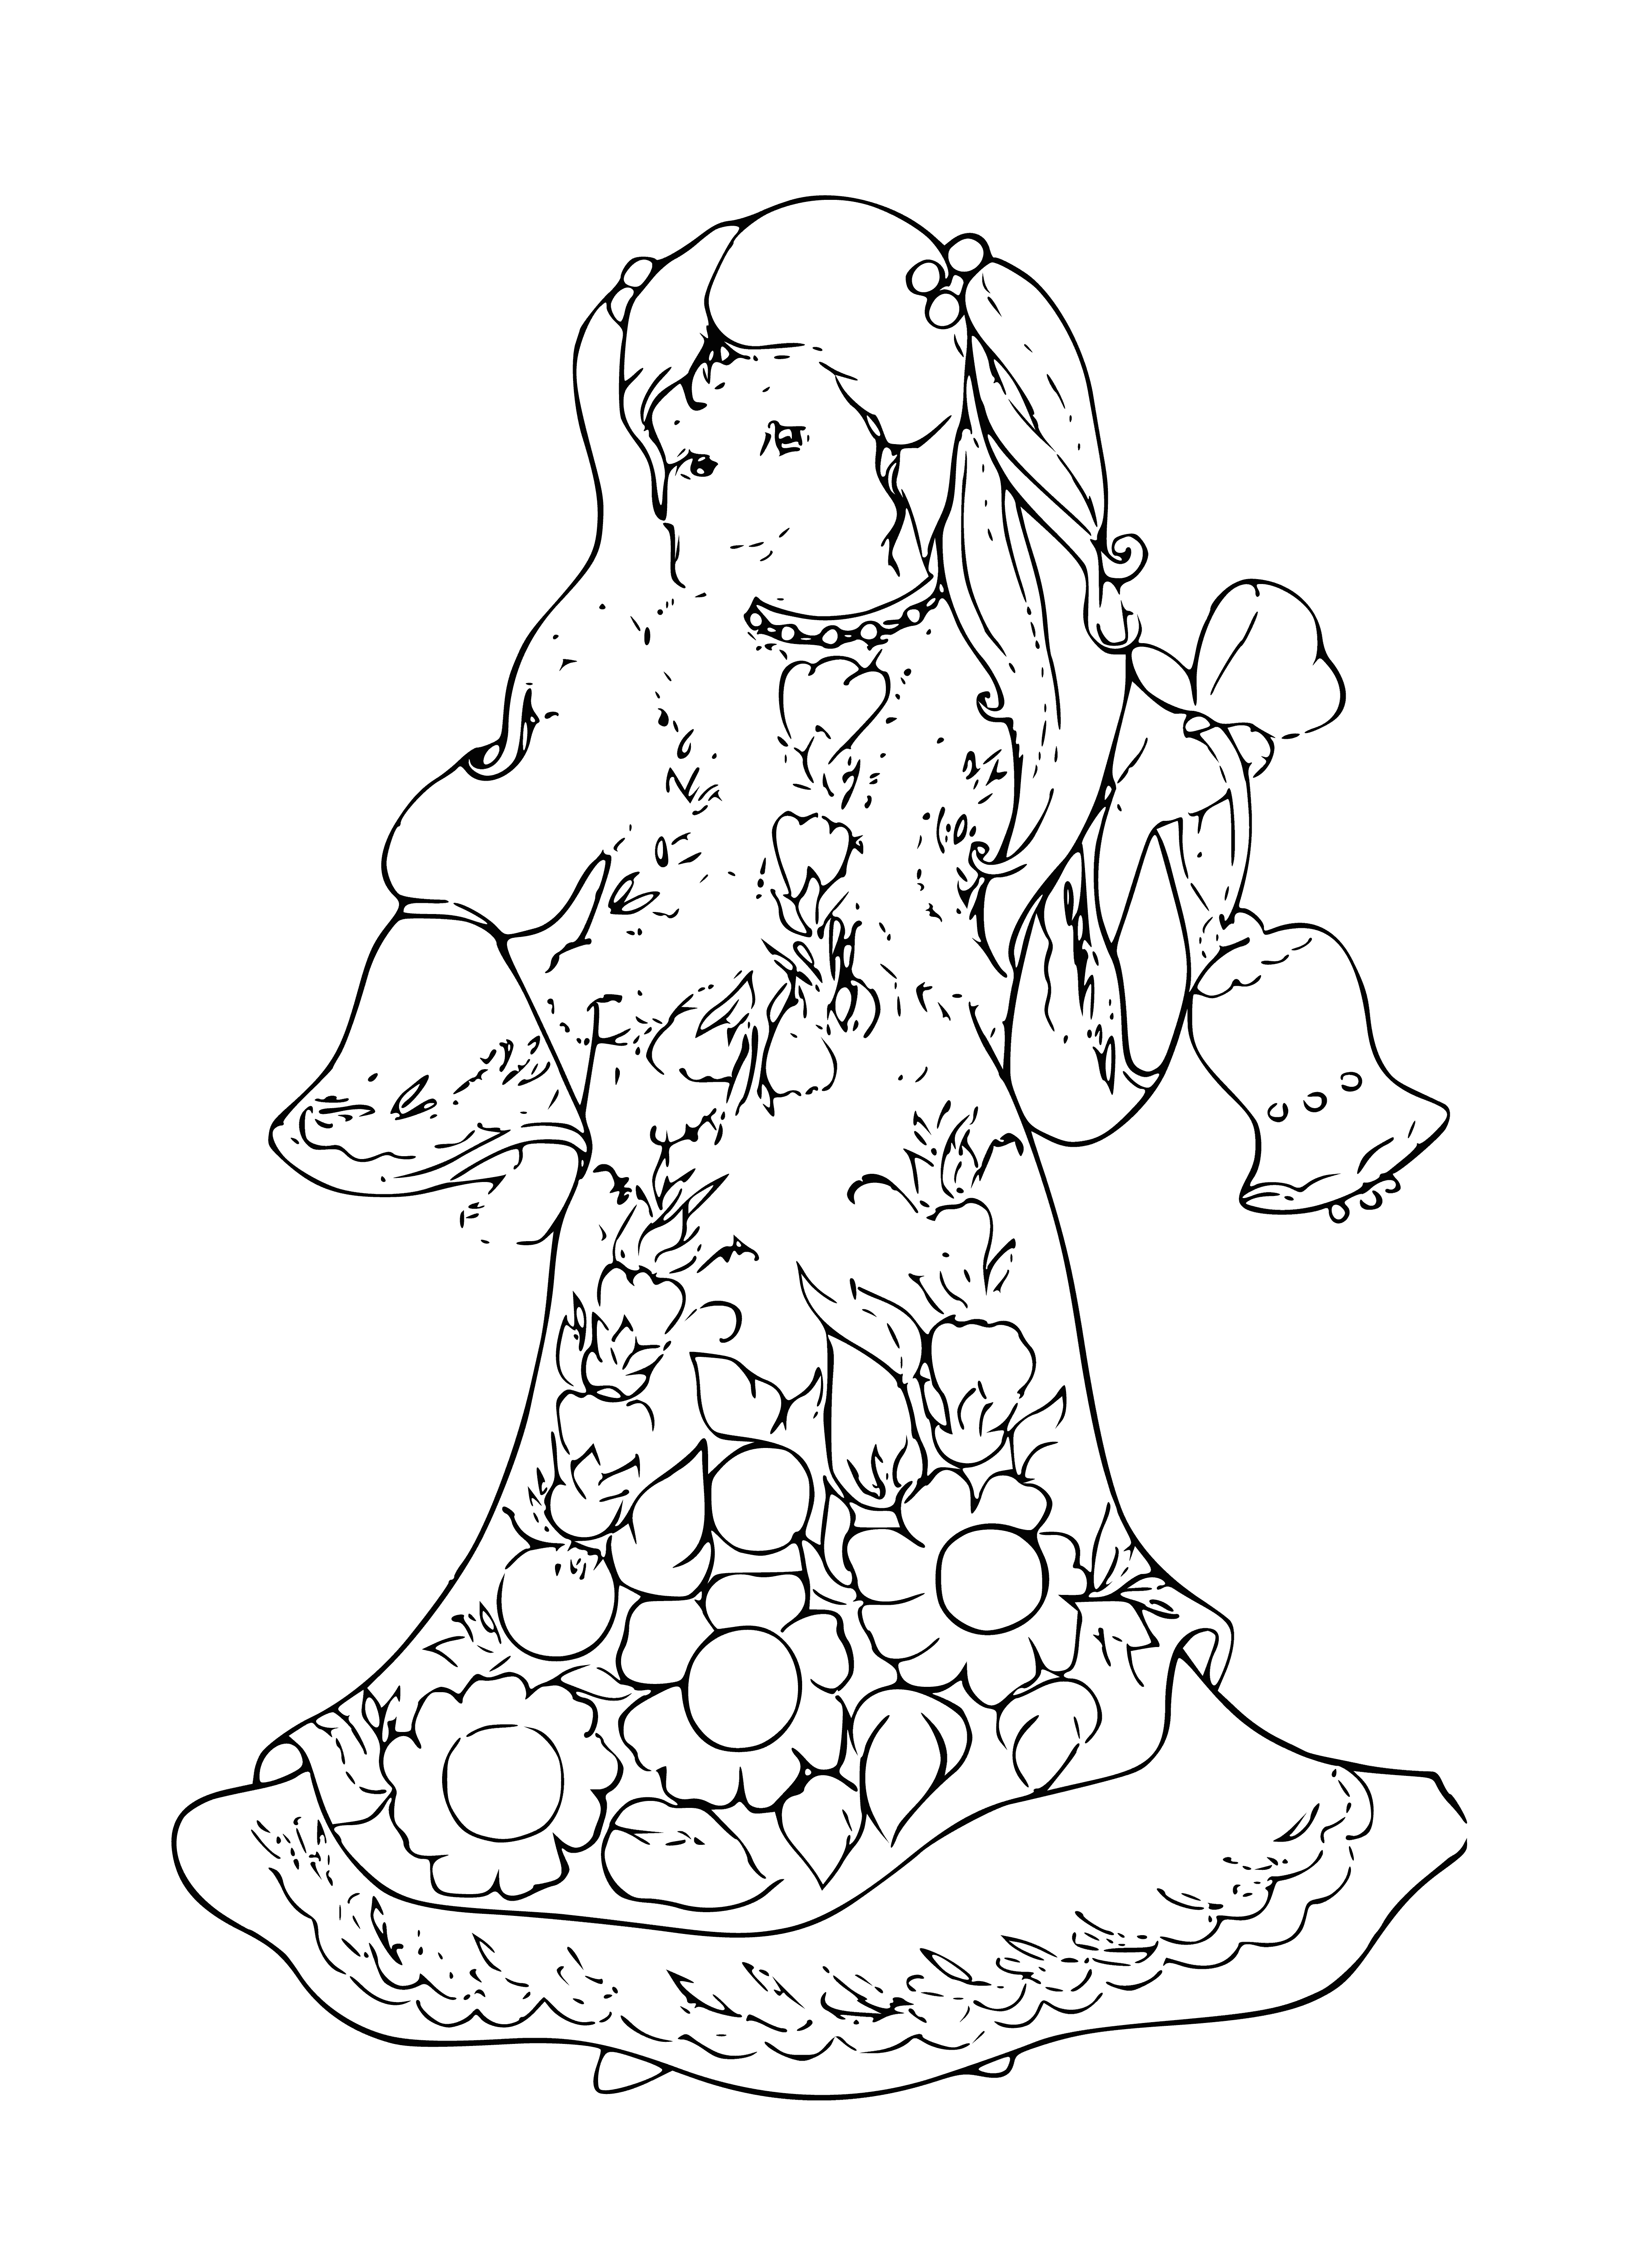 coloring page: Three women in patterned dresses, scarves, and braids come alive on this colorful page. #coloringpages